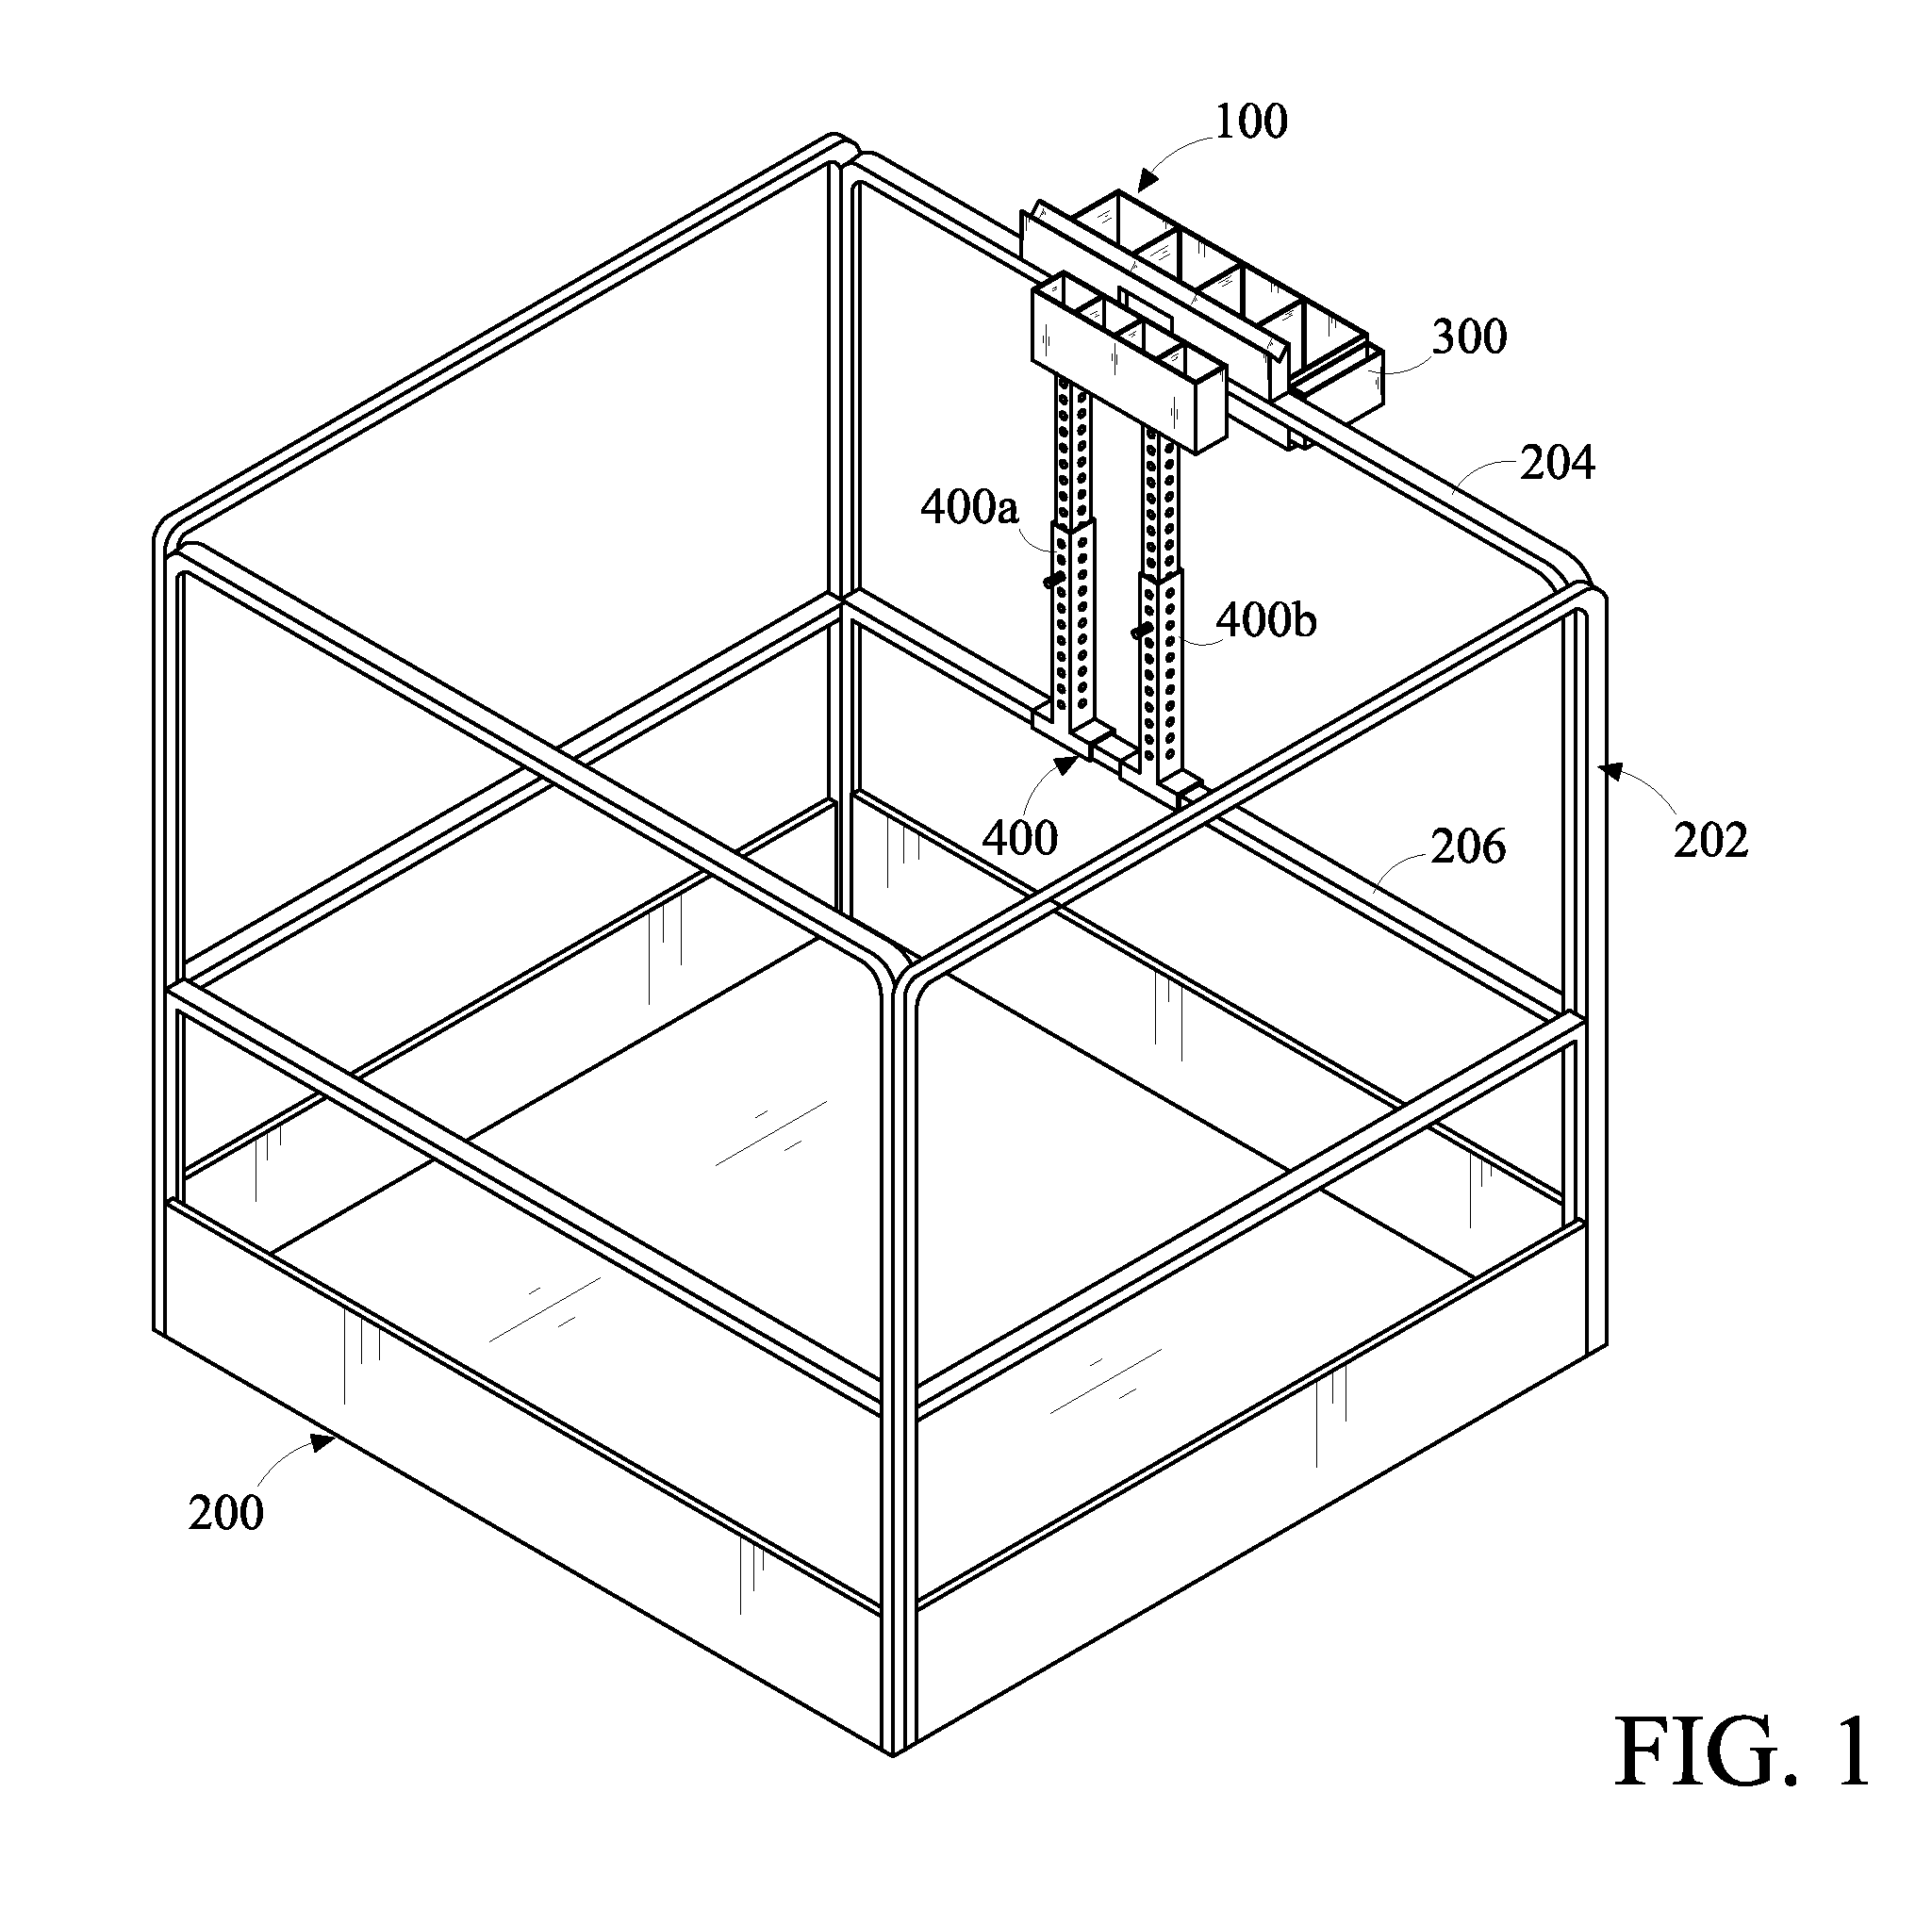 Article holding device for aerial work platform